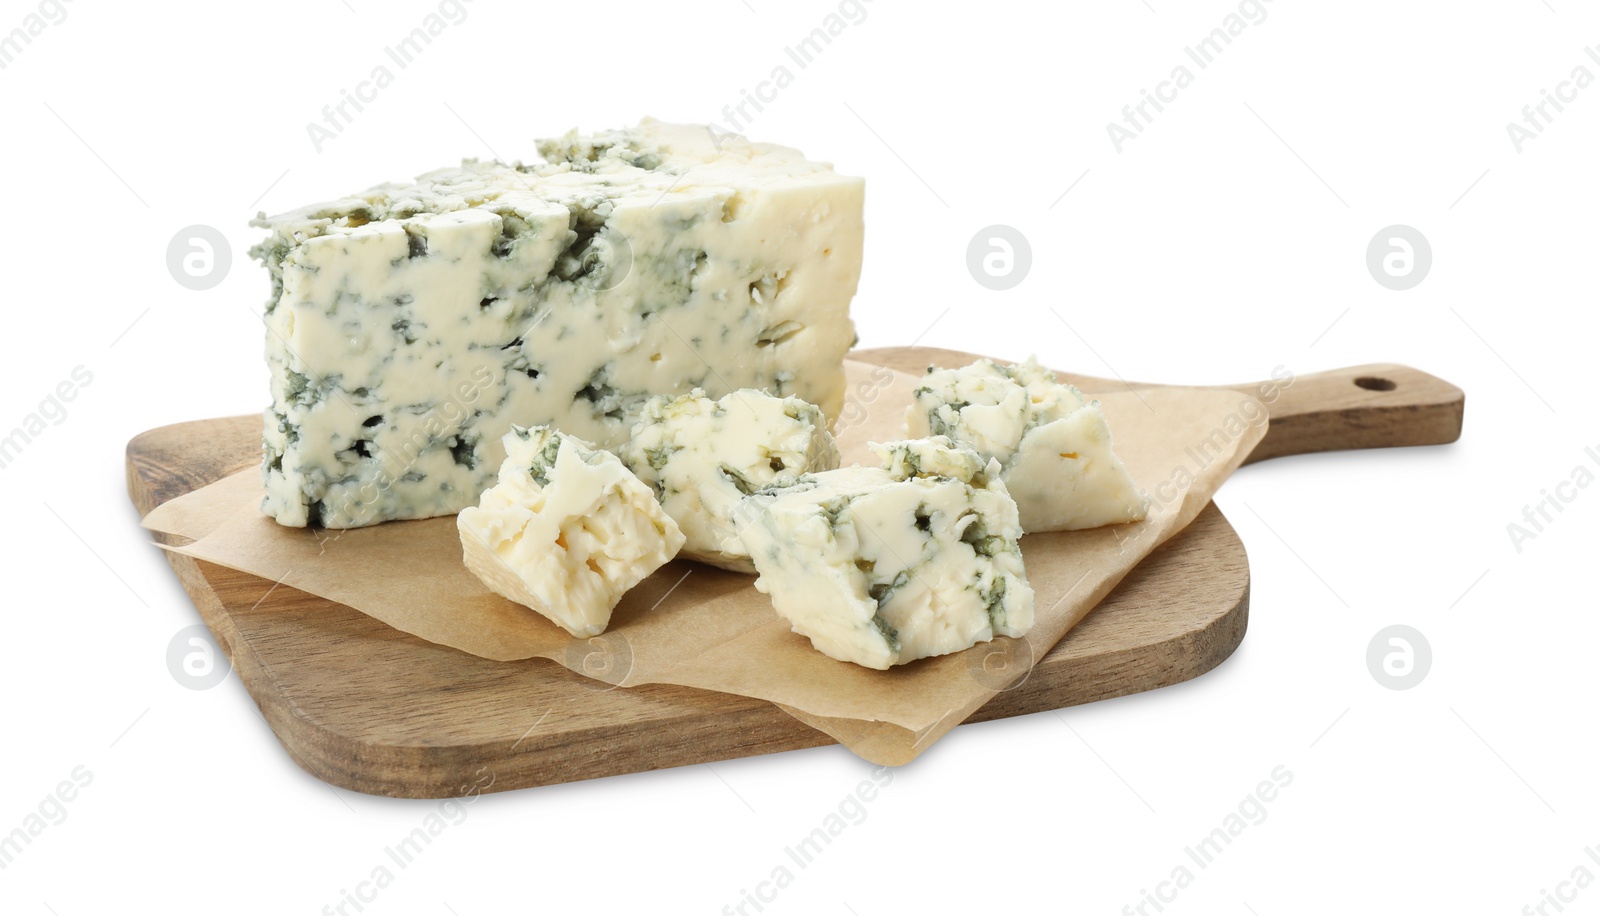 Photo of Wooden cutting board with blue cheese isolated on white